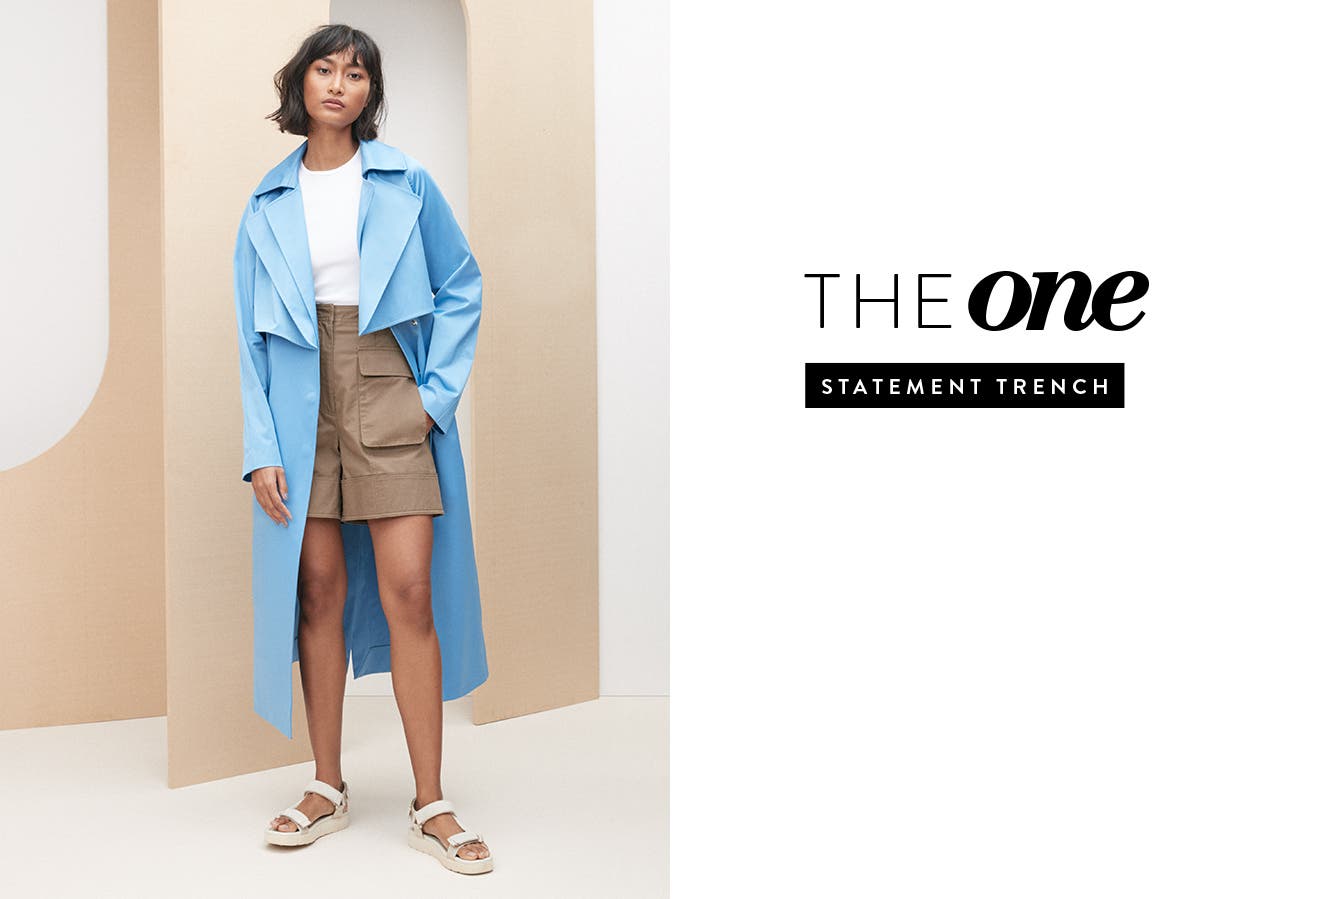 The one: statement trench.